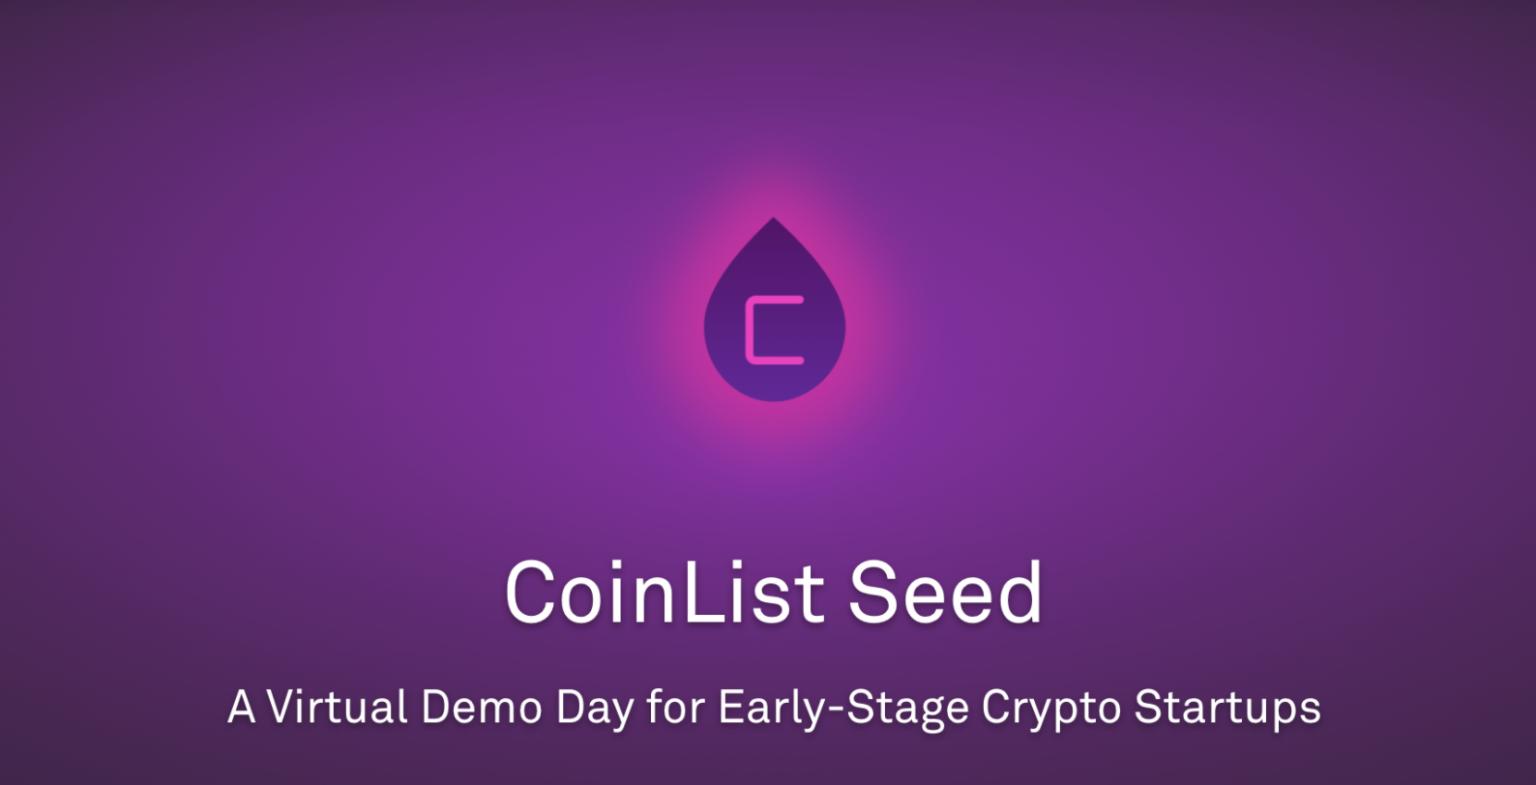 Introducing CoinList Seed